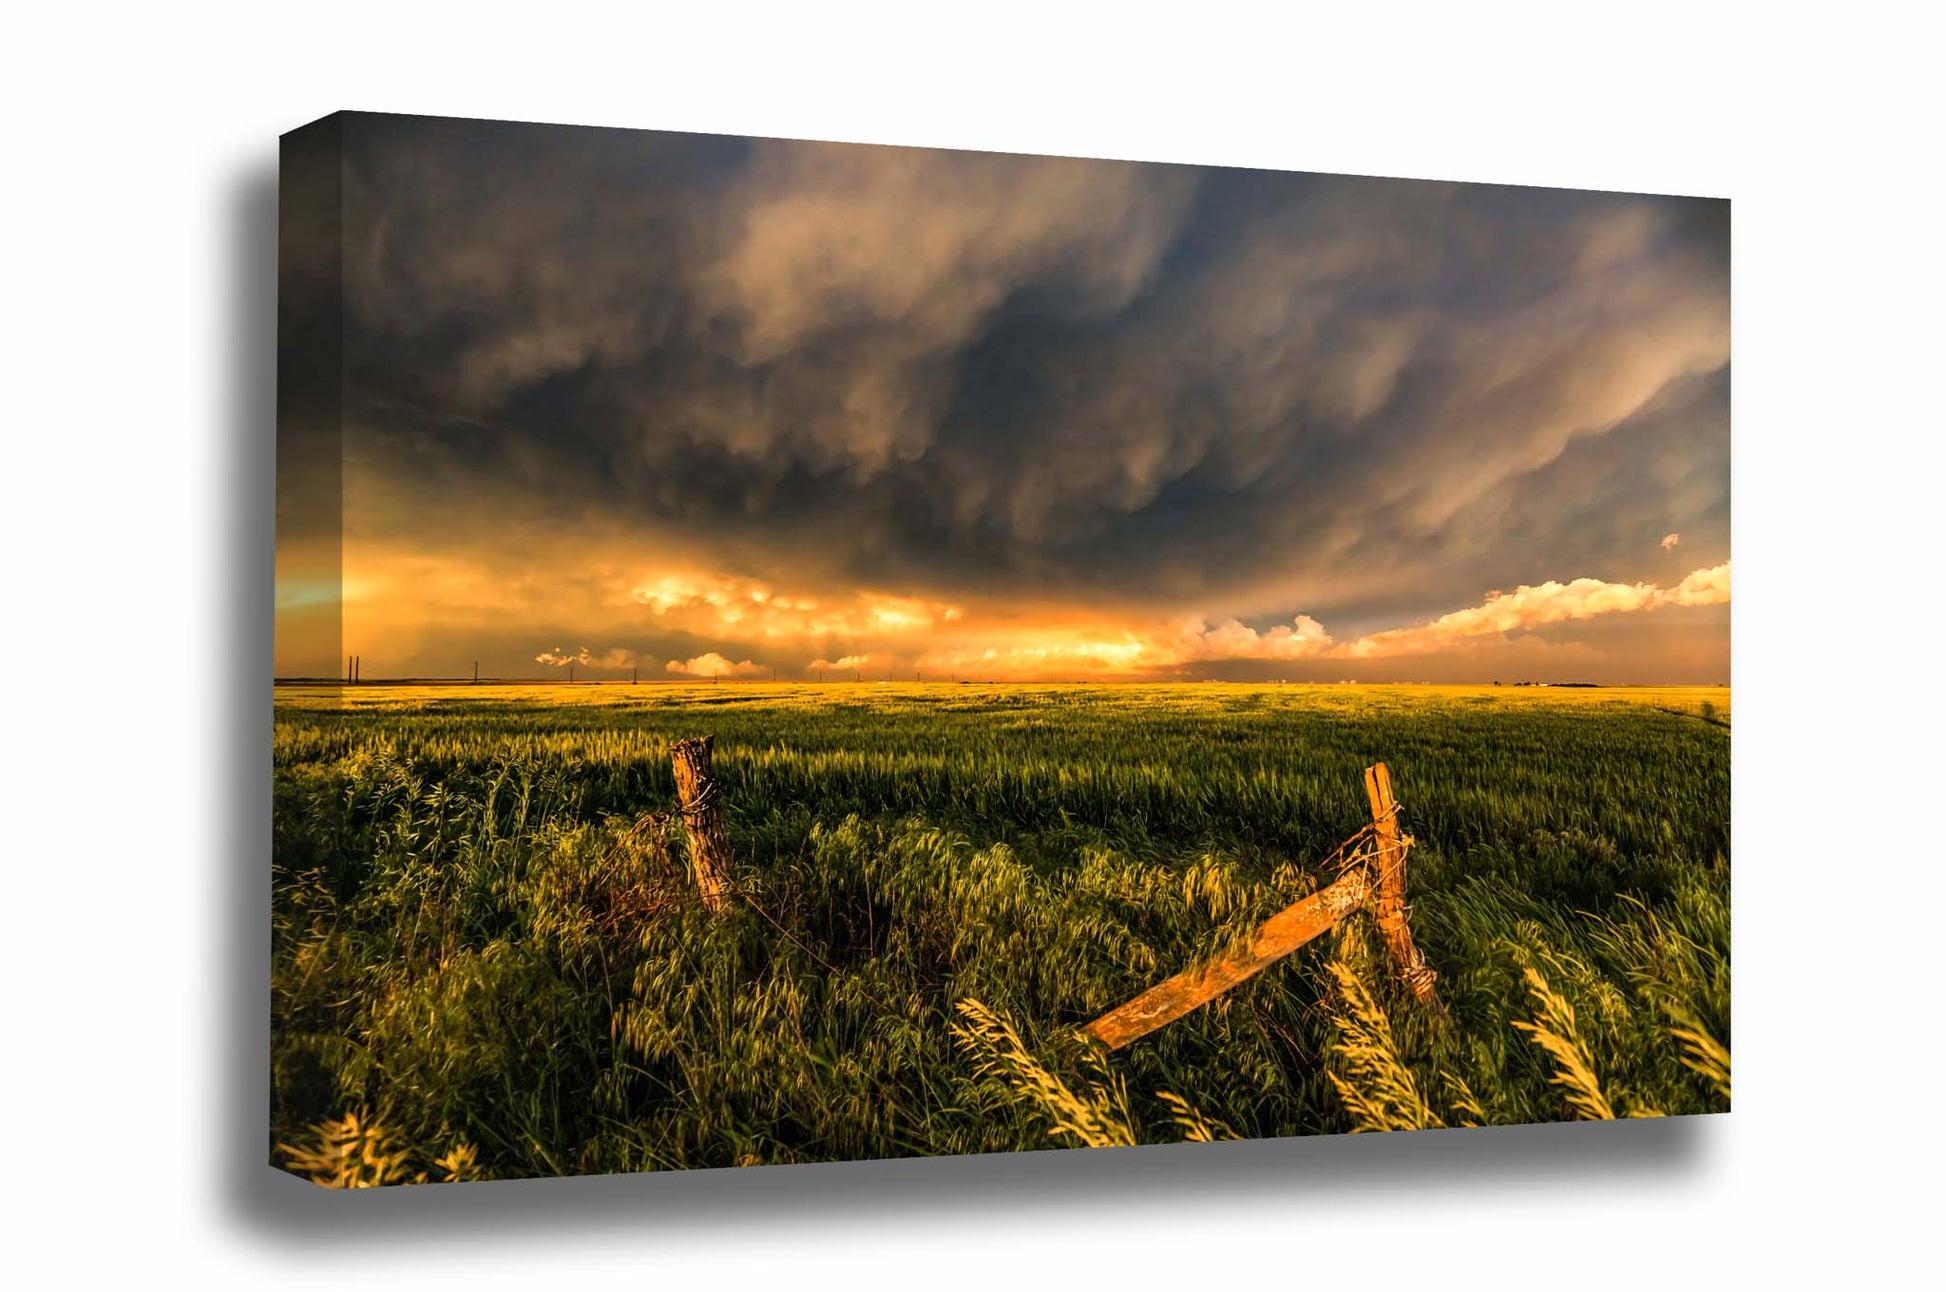 Great plains canvas wall art of storm clouds illuminated by sunlight over an old fence and field at sunset on a stormy evening in Kansas by Sean Ramsey of Southern Plains Photography.